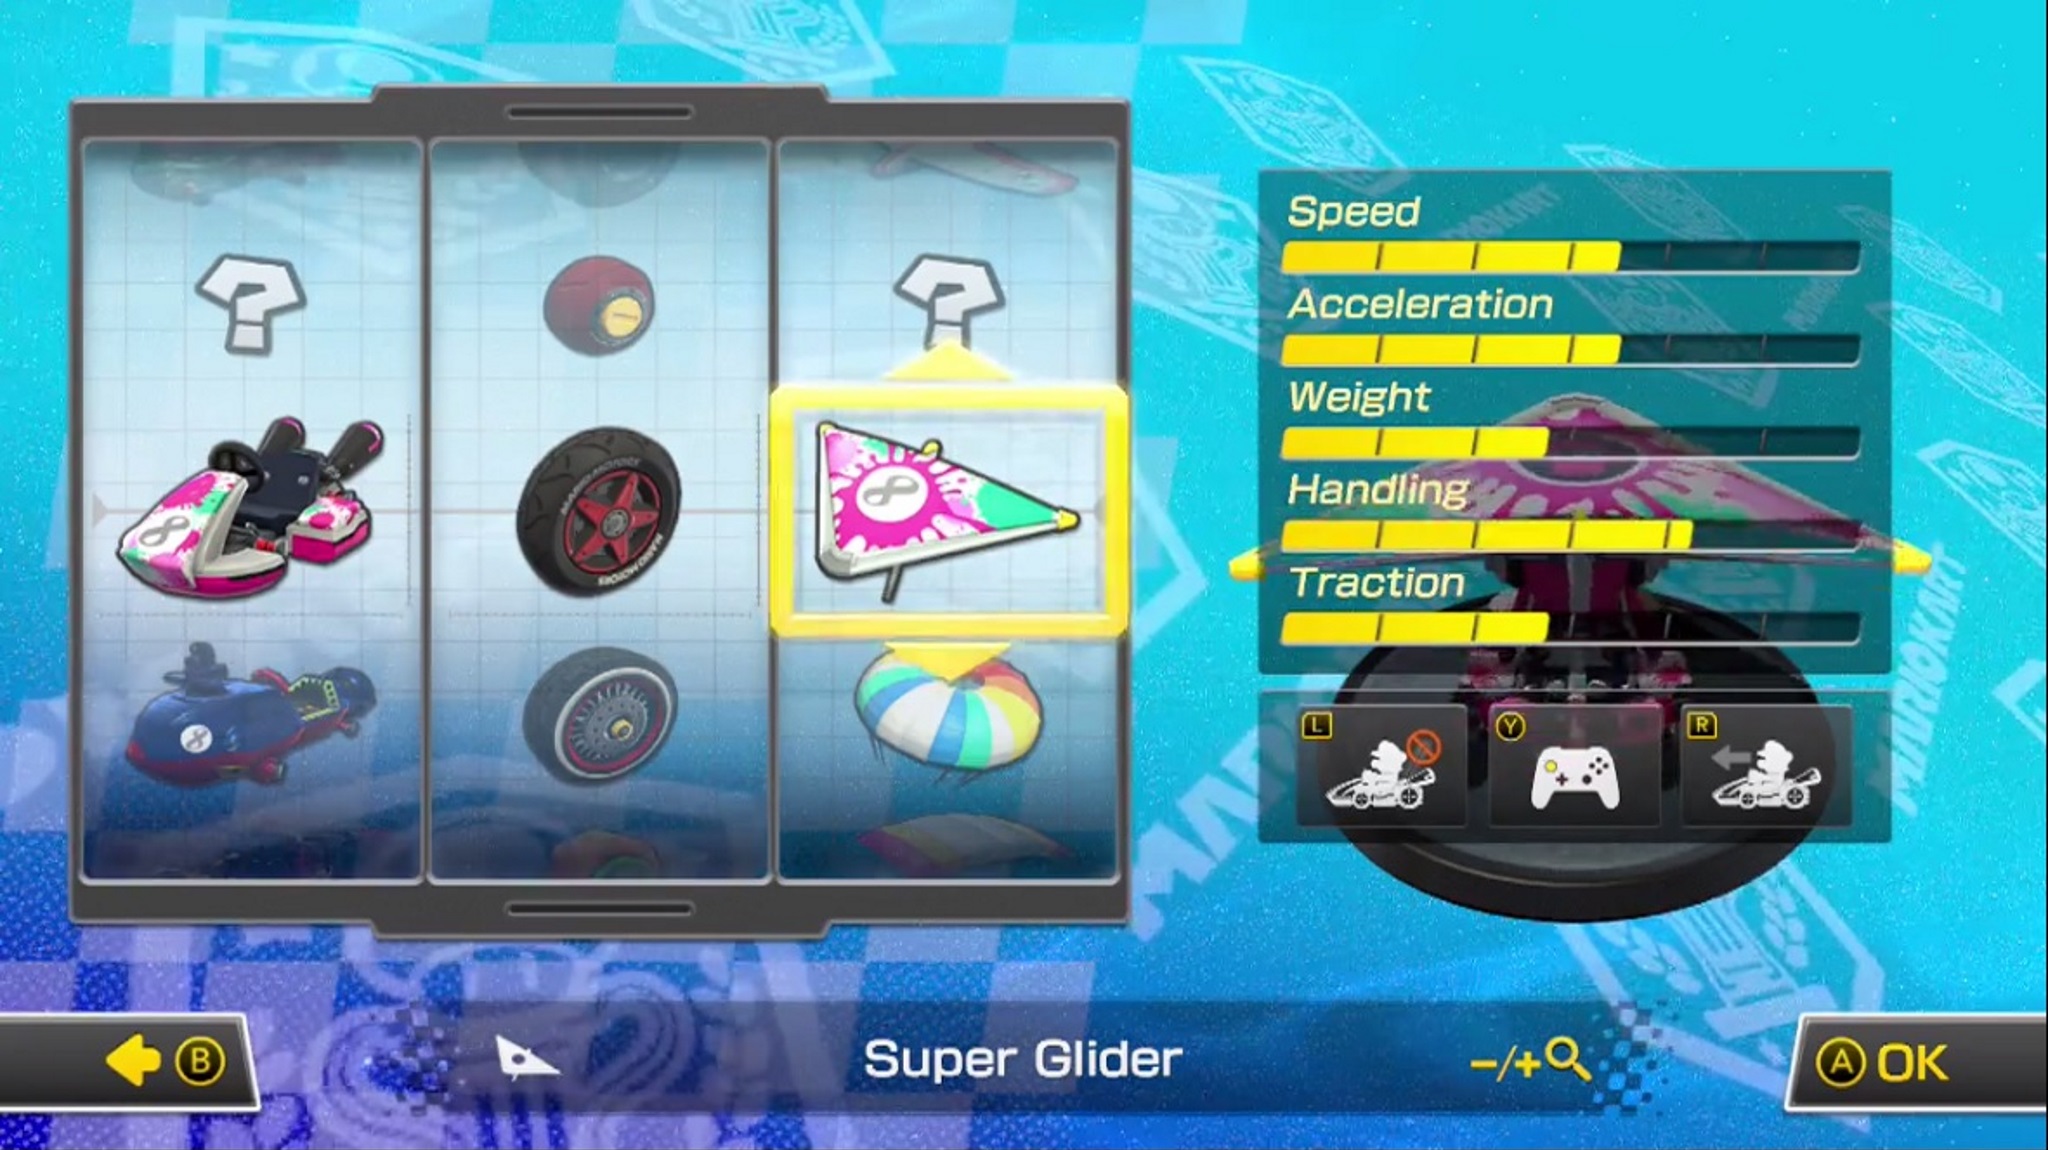 How To Perform The New Super Drift Boost In Mario Kart 8 Deluxe Imore